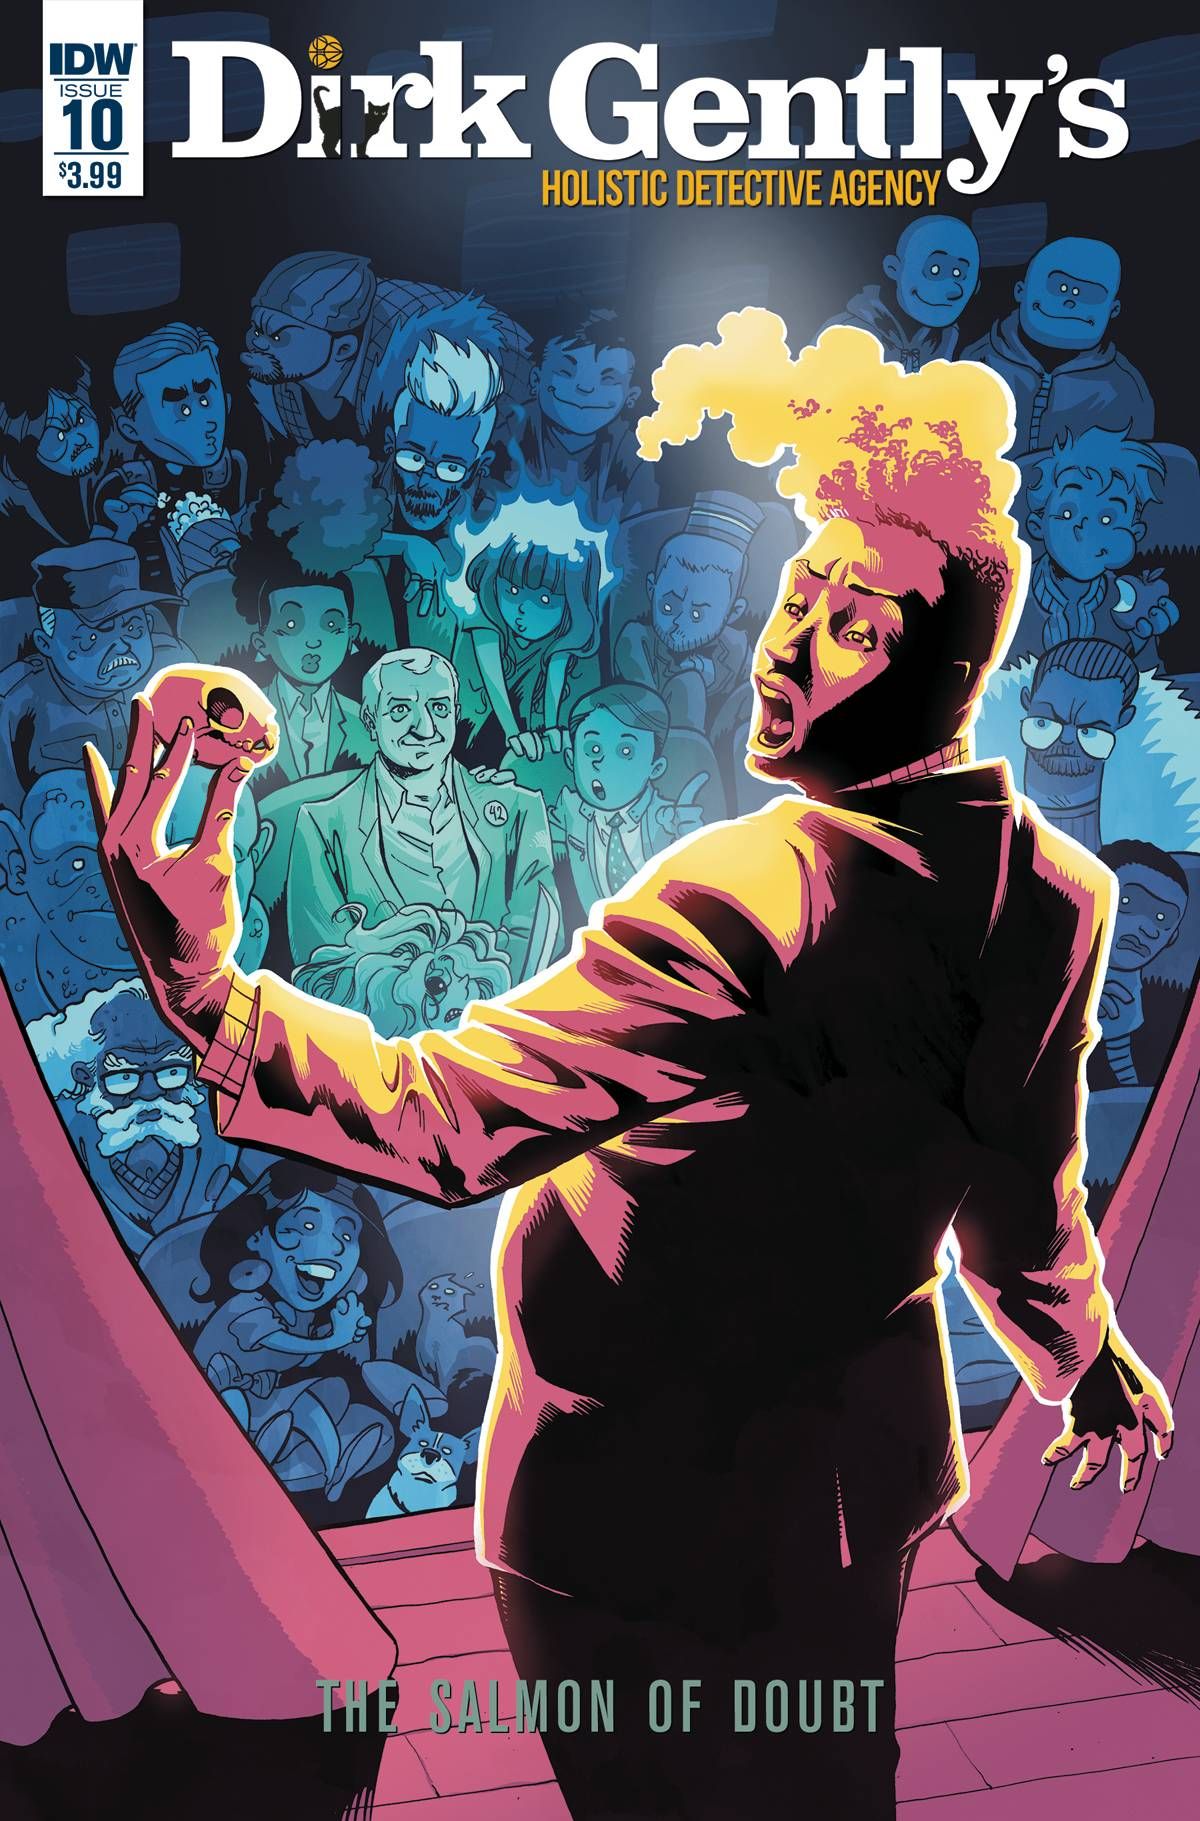 Dirk Gently's Holistic Detective Agency: Salmon of Doubt #10 Comic